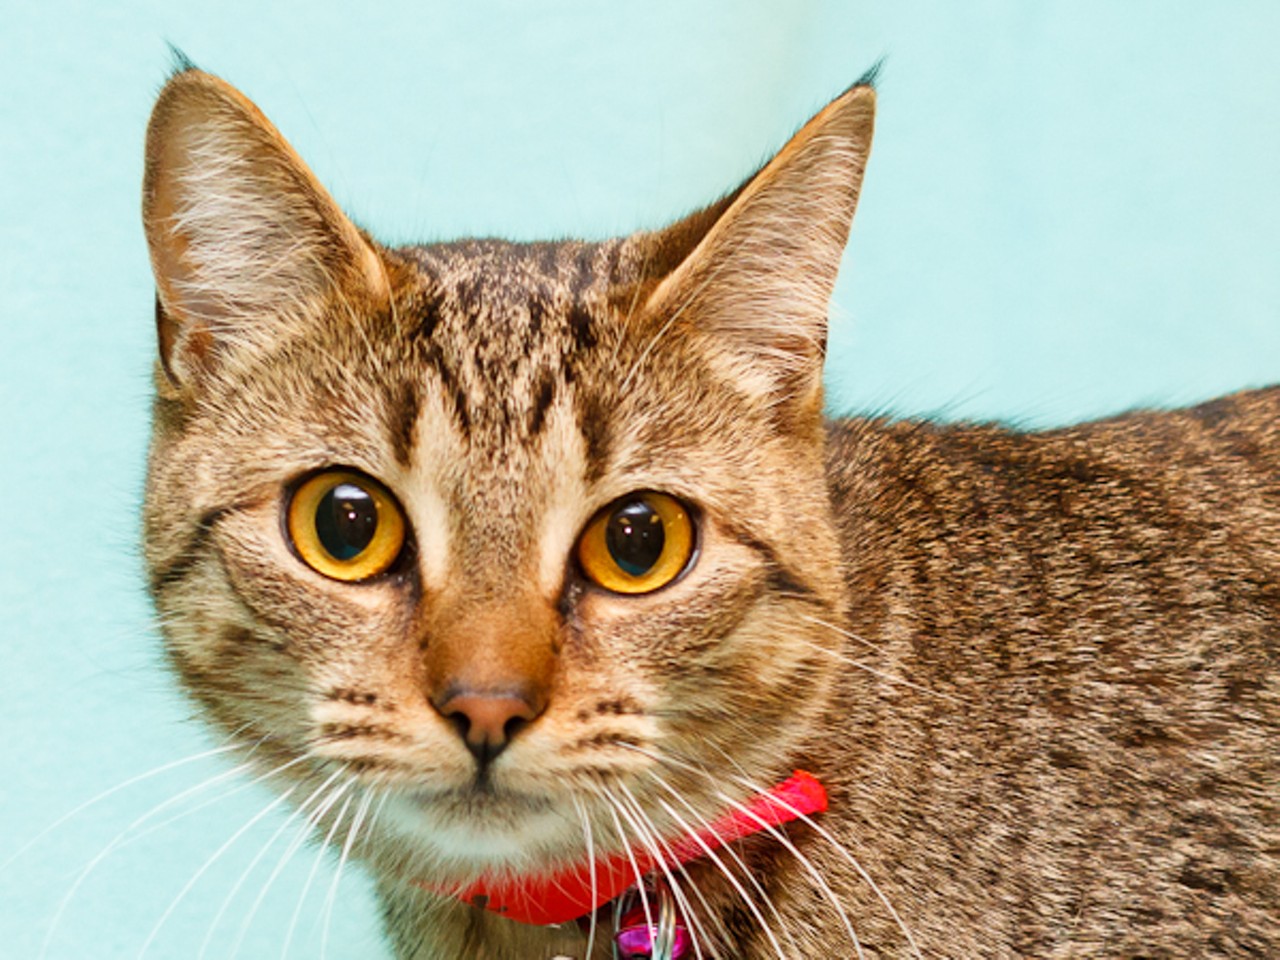 NAME:Lilly 
GENDER: Female
BREED: Domestic Short Hair
AGE: 6 years, 3 months
WEIGHT: 9 pounds
SPECIAL CONSIDERATIONS: Lilly and Nutmeg are a bonded pair, meaning  they must be adopted together. 
REASON I CAME TO MHS: Owner surrender
LOCATION: Rochester Hills Center for Animal Care
ID NUMBER: 747147